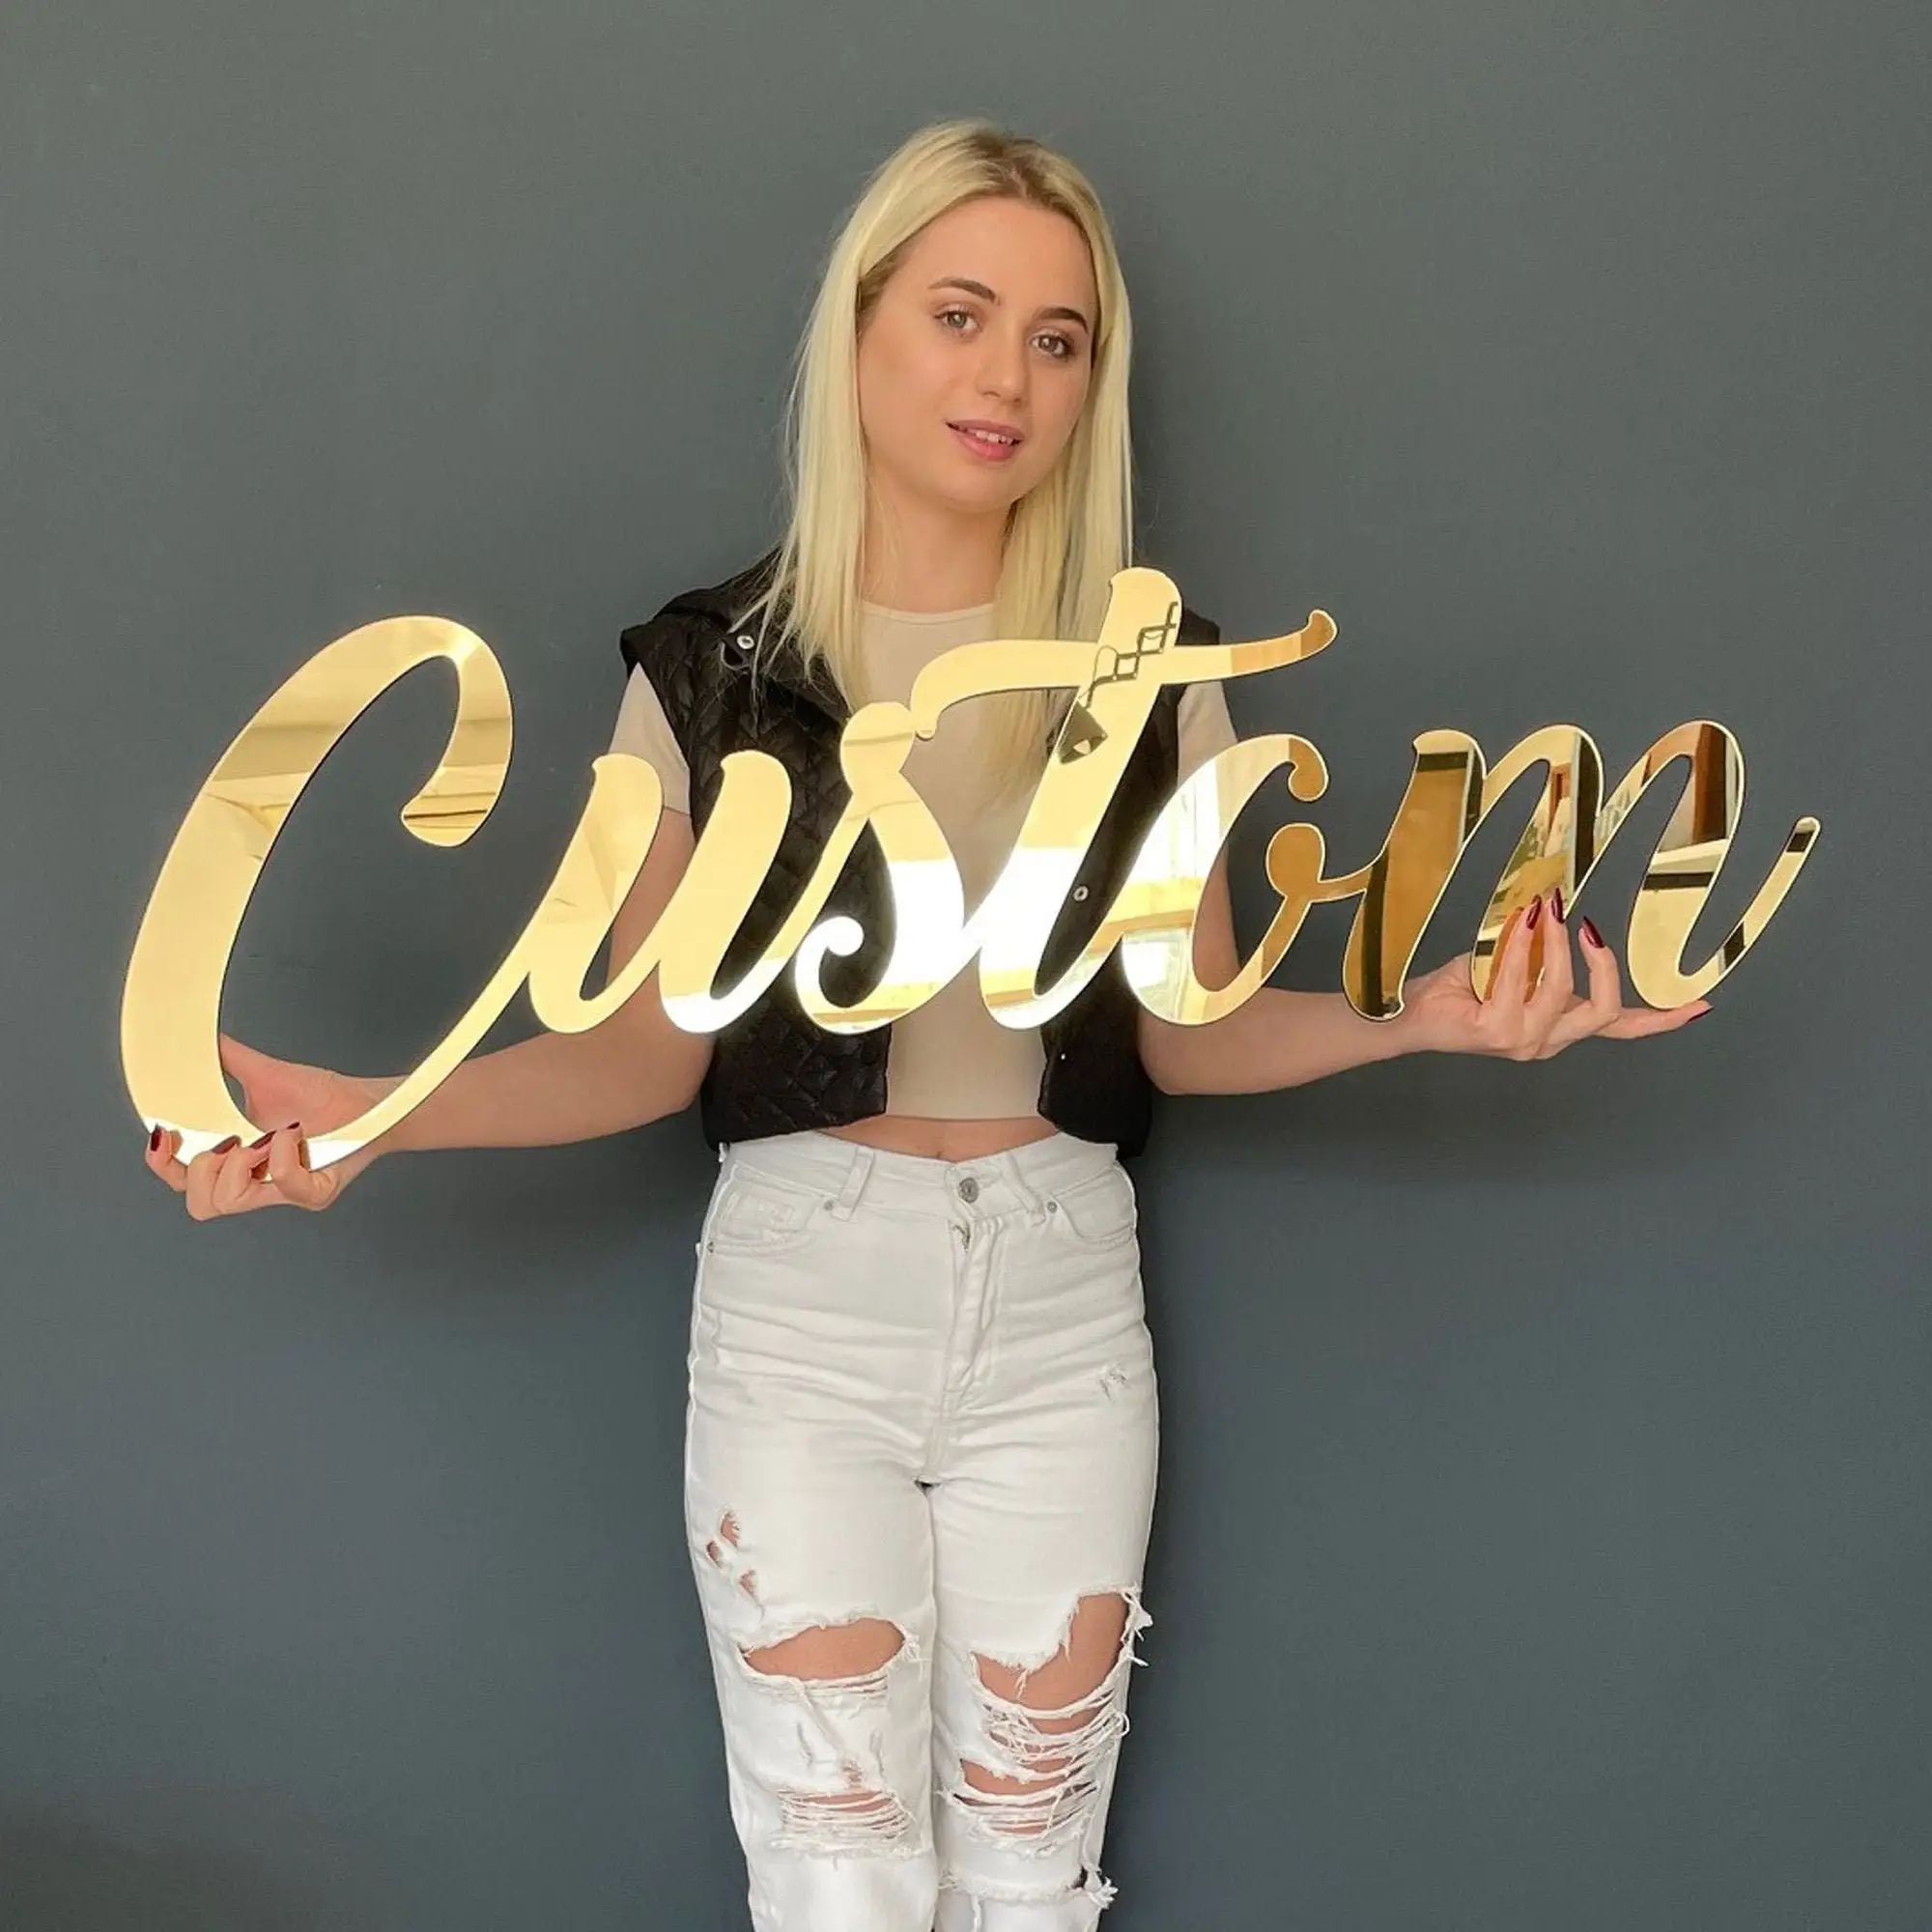 

Custom Name Sign Decor Personalized Acrylic Mirror Gold Wood Wall Signs Baby Shower Nursery Decor Wedding Party Plaque Letters